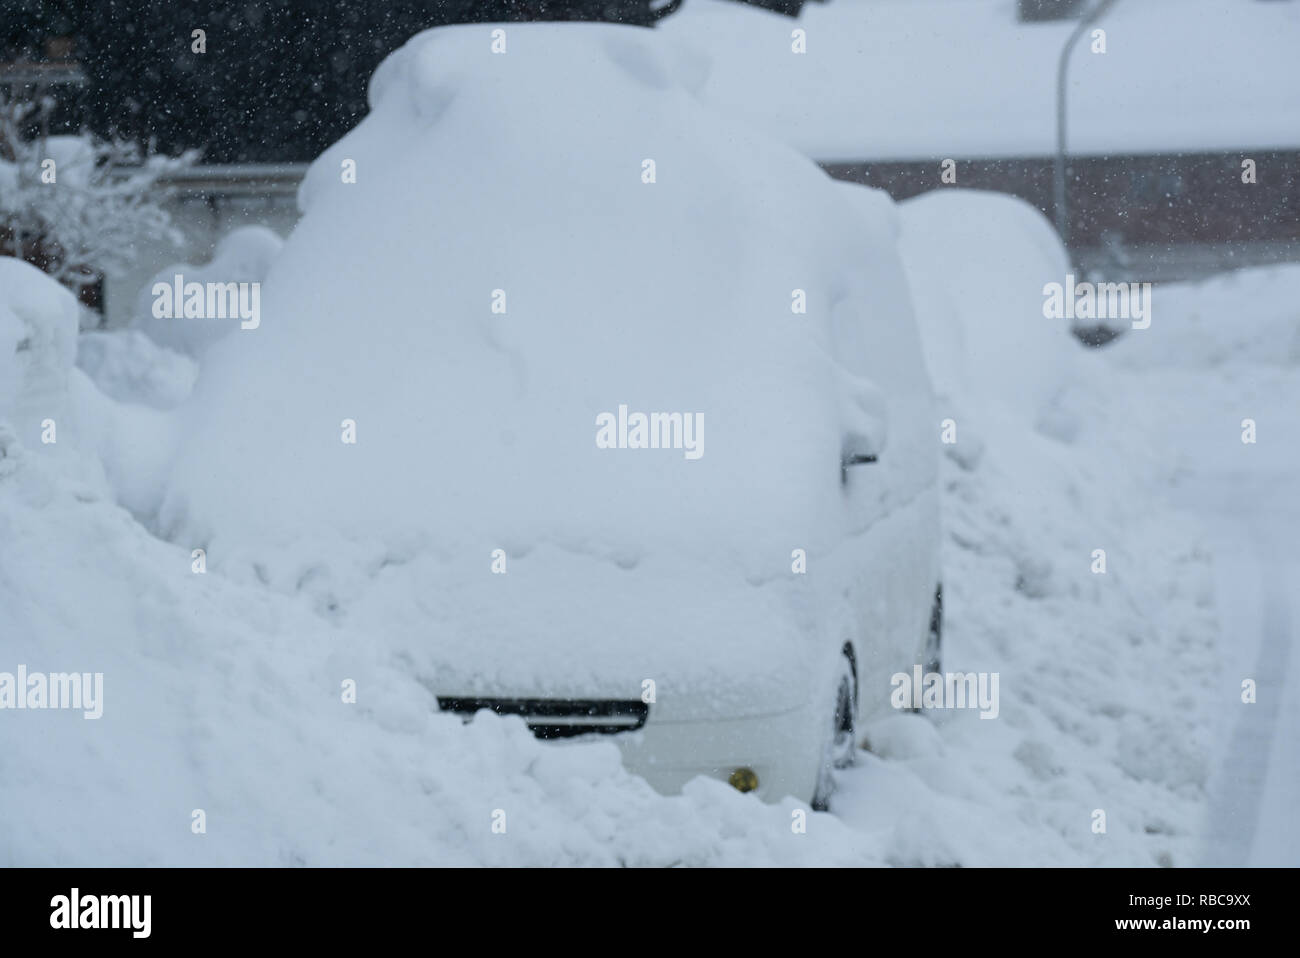 Snow on cars after snowfall. Winter urban scene. Car is complete covered. Chaos and catastophe alert in bavaria germany Stock Photo